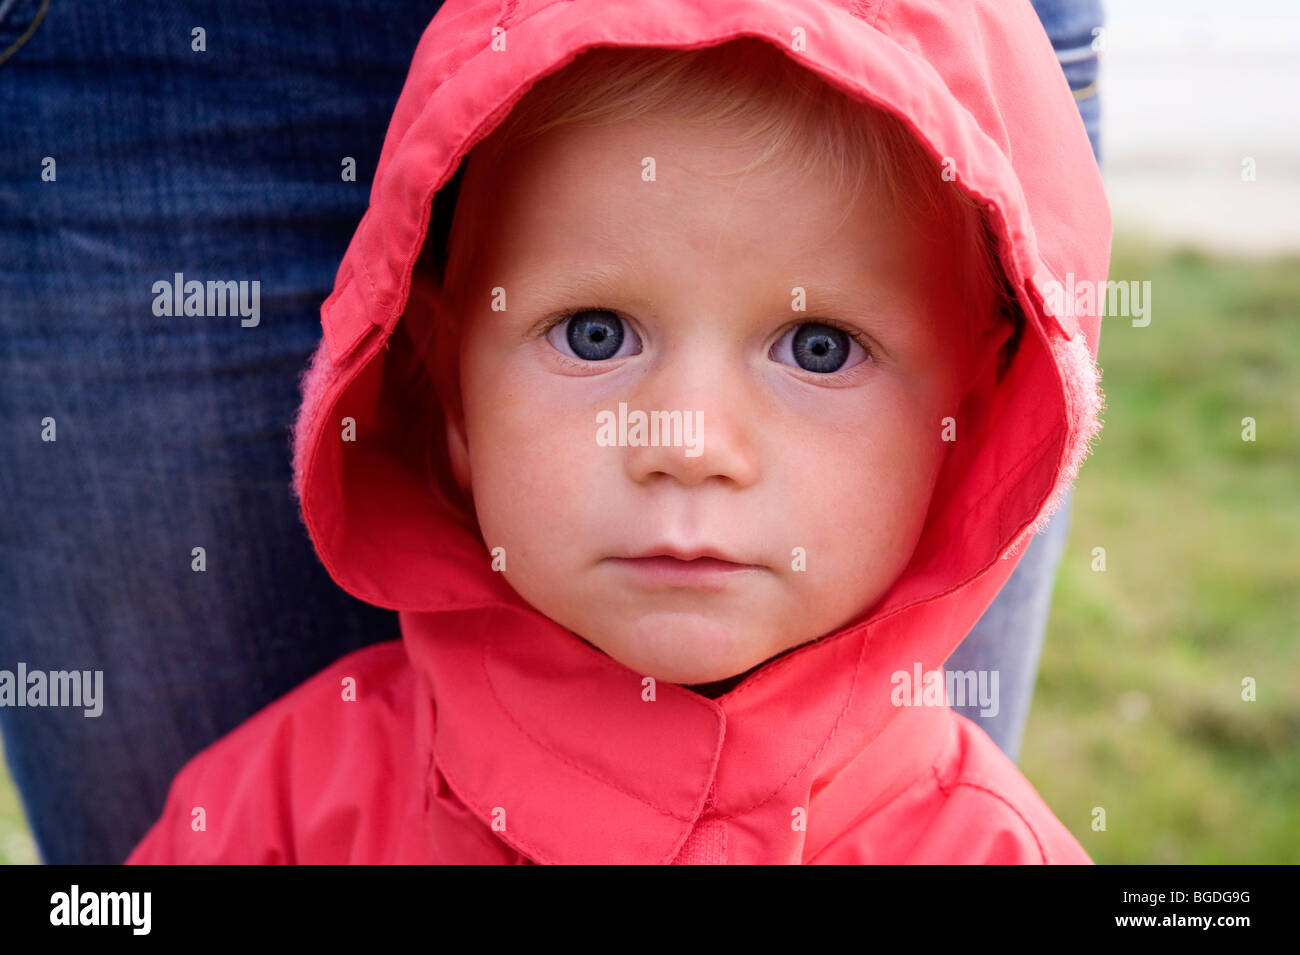 Portrait of a little girl with a red rain jacket, her mother behind her Stock Photo